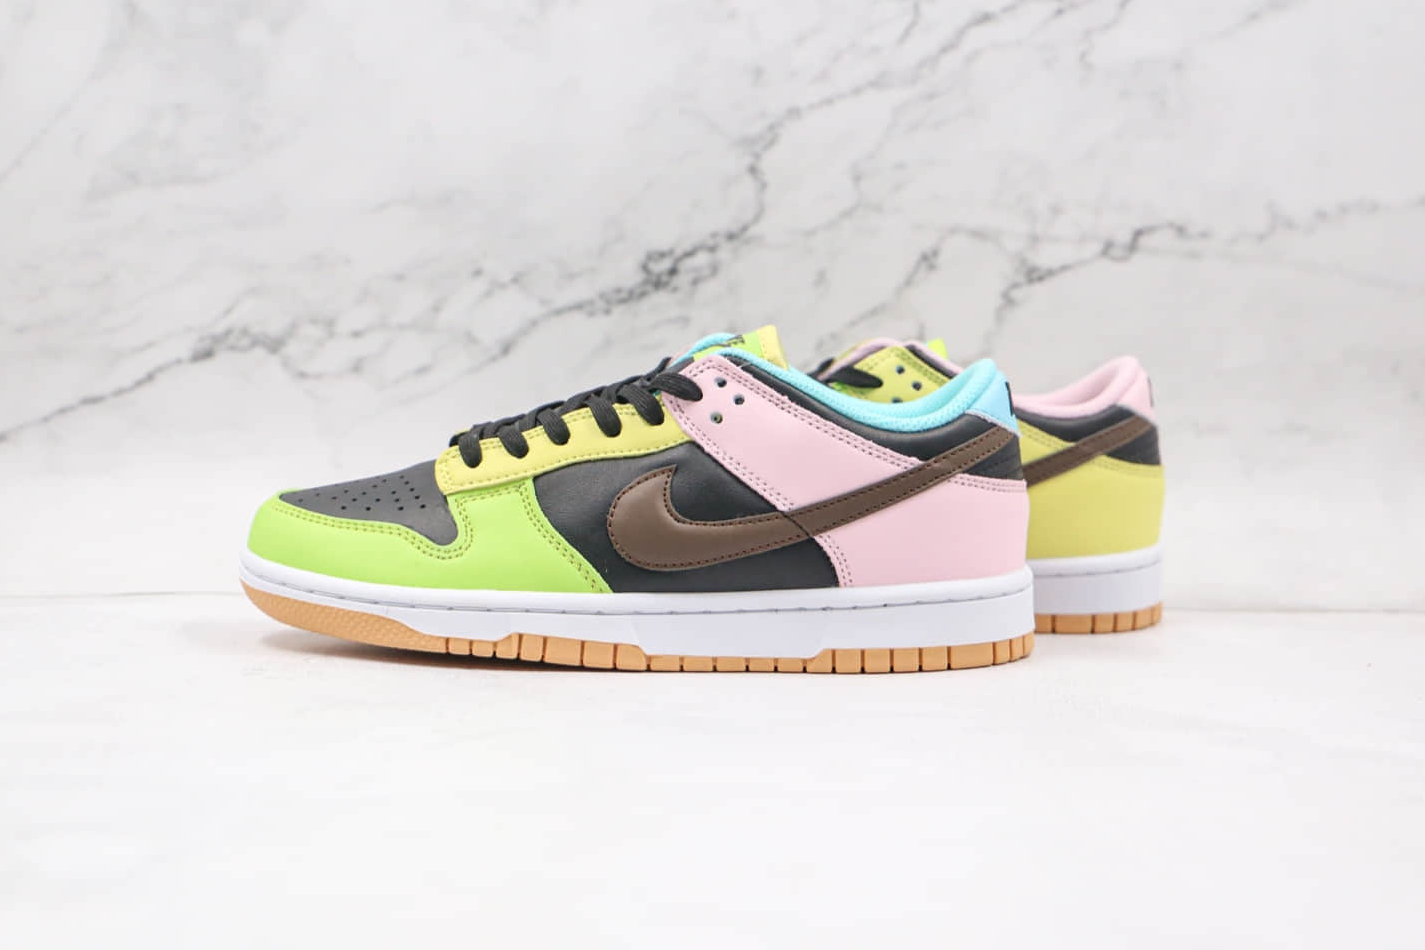 Nike Dunk Low SE ‘Free.99 - Black’ DH0952 001 - Limited Edition Stylish Sneakers